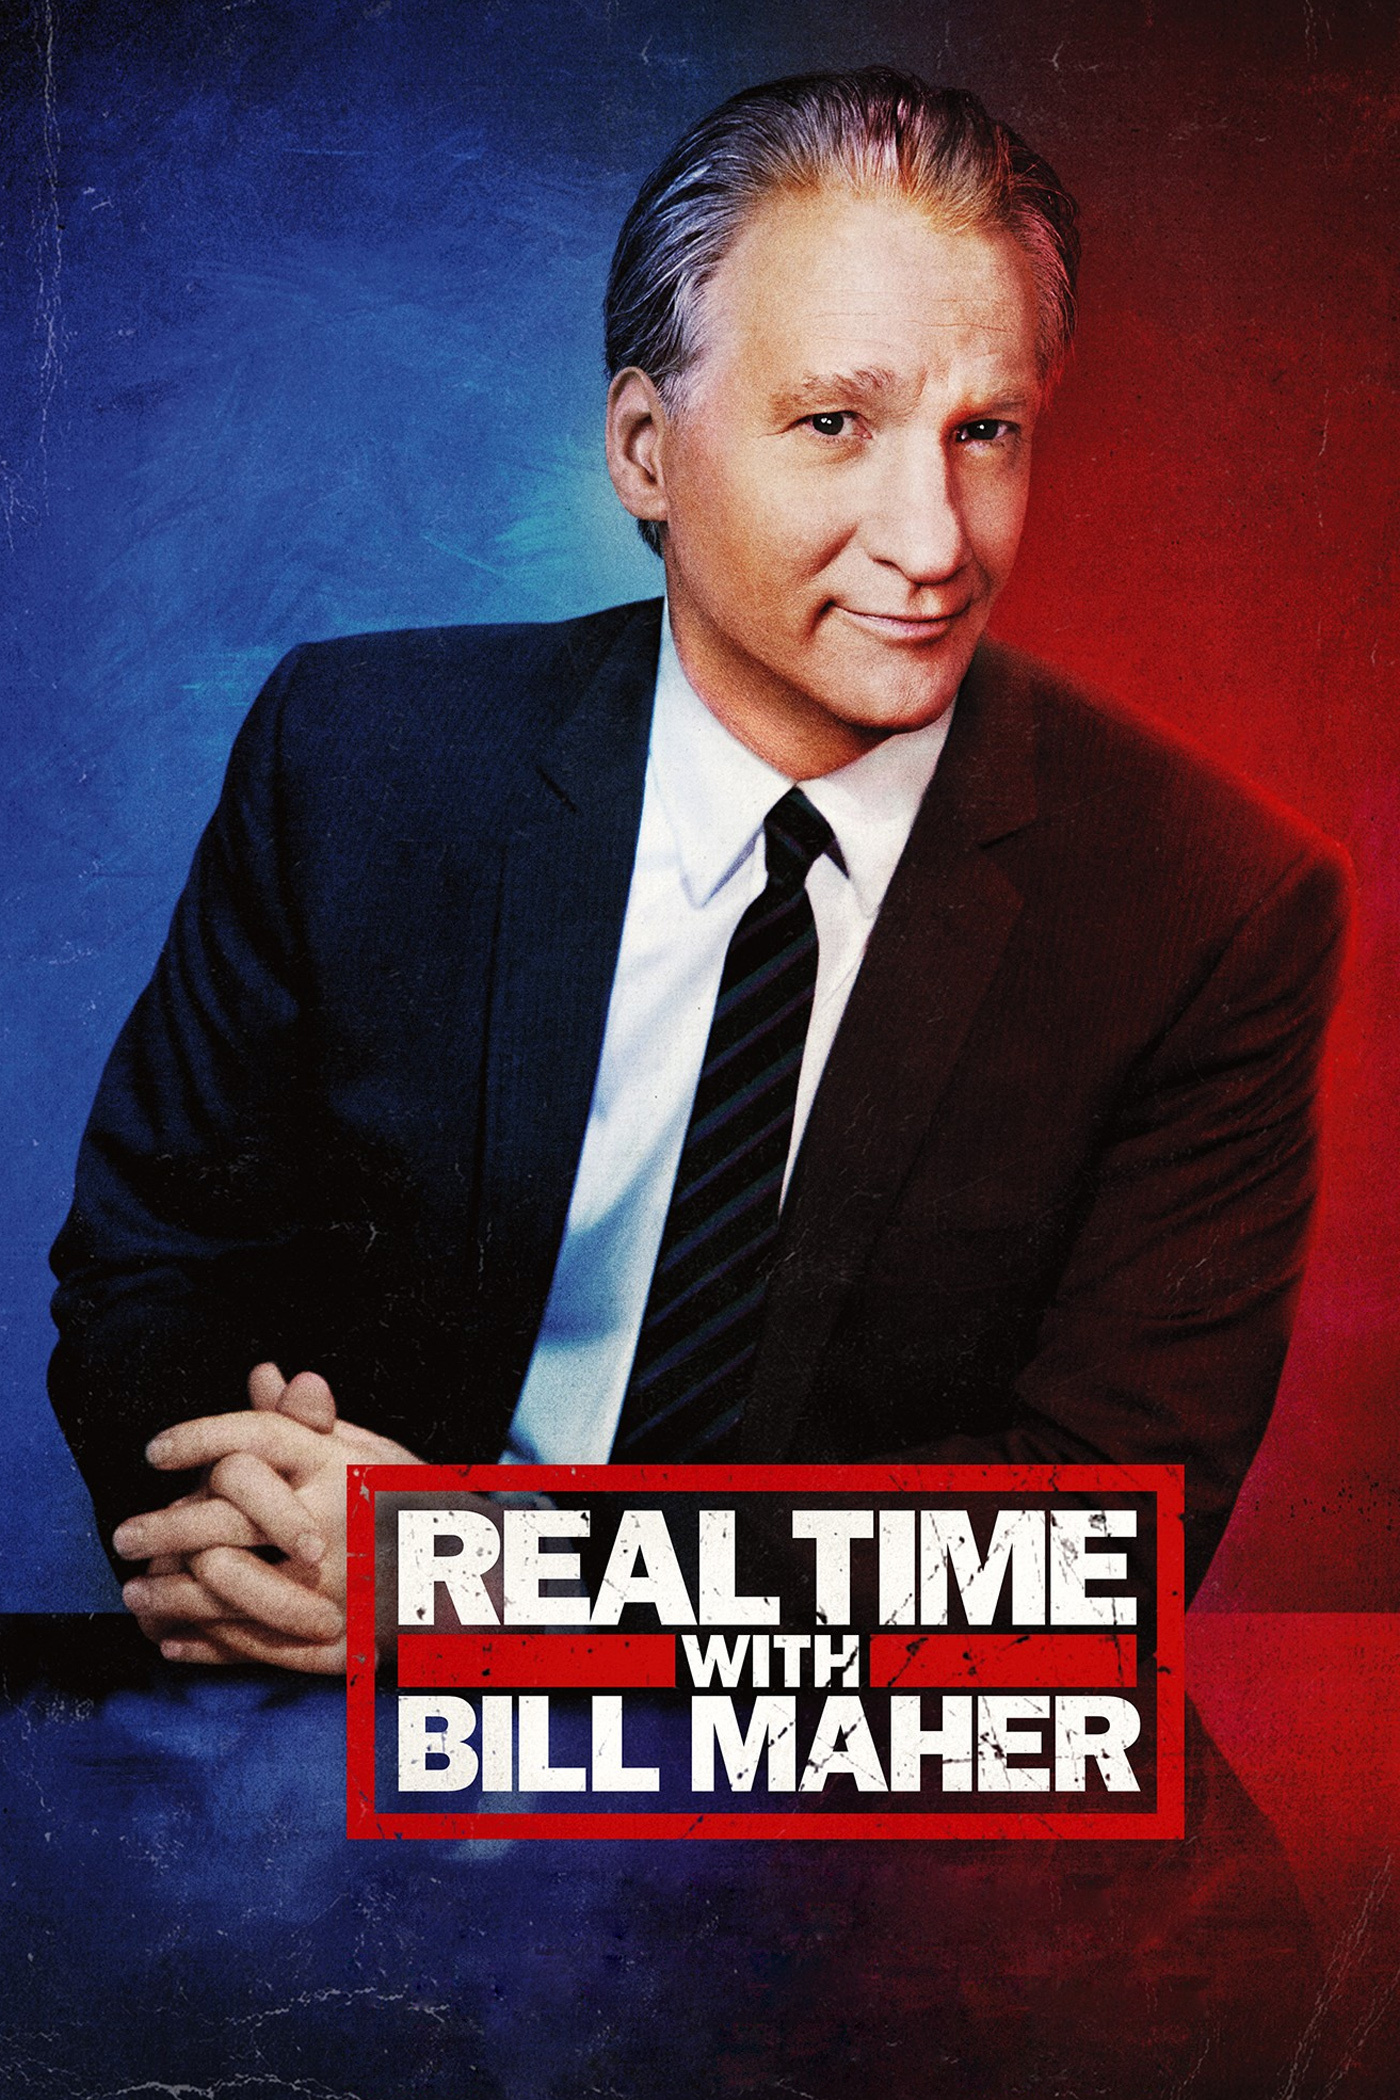 Real Time with Bill Maher Picture Image Abyss